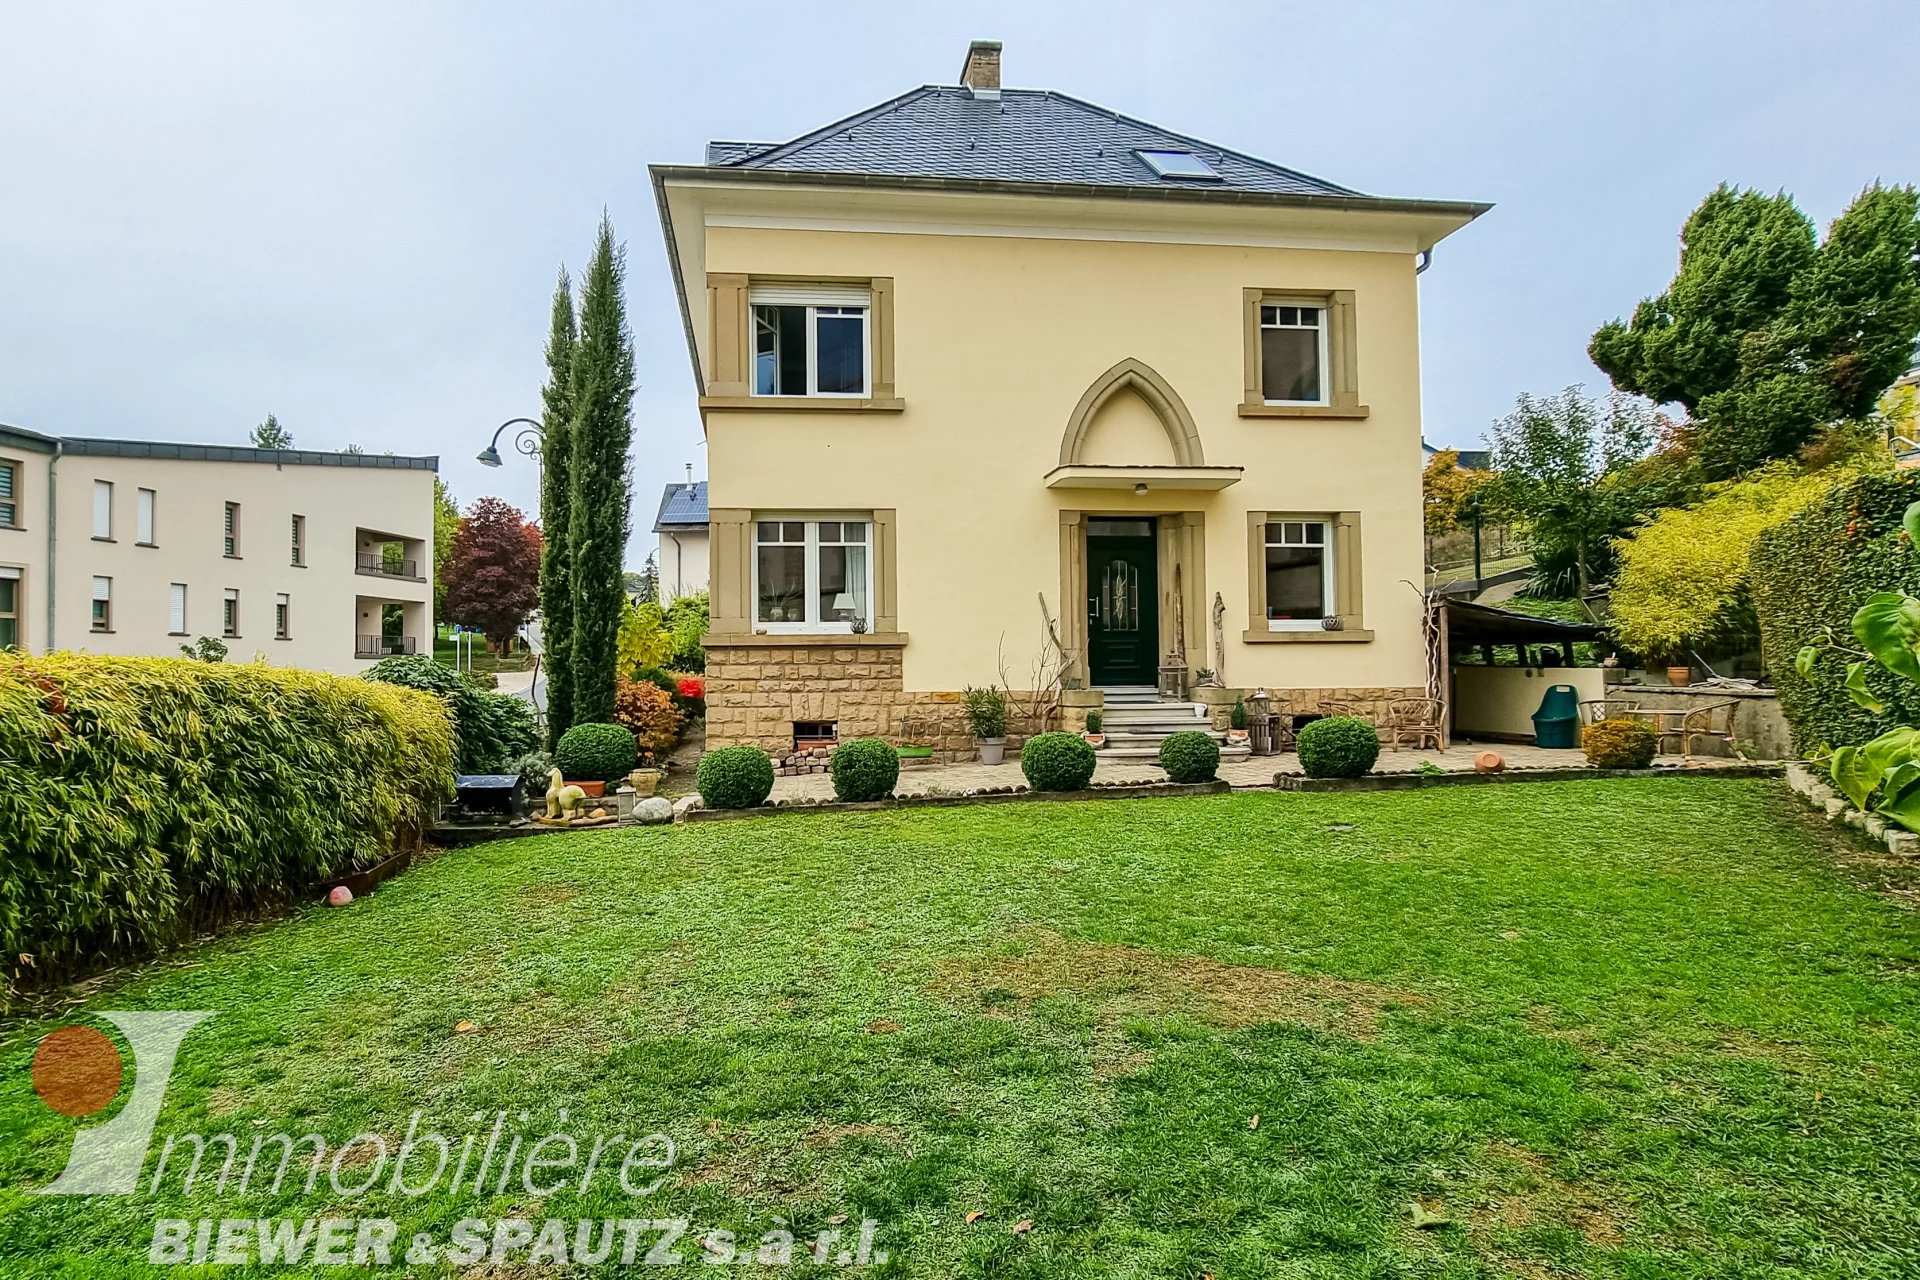 Unique Detached House (Former Rectory) with 3 Bedrooms in Berbourg